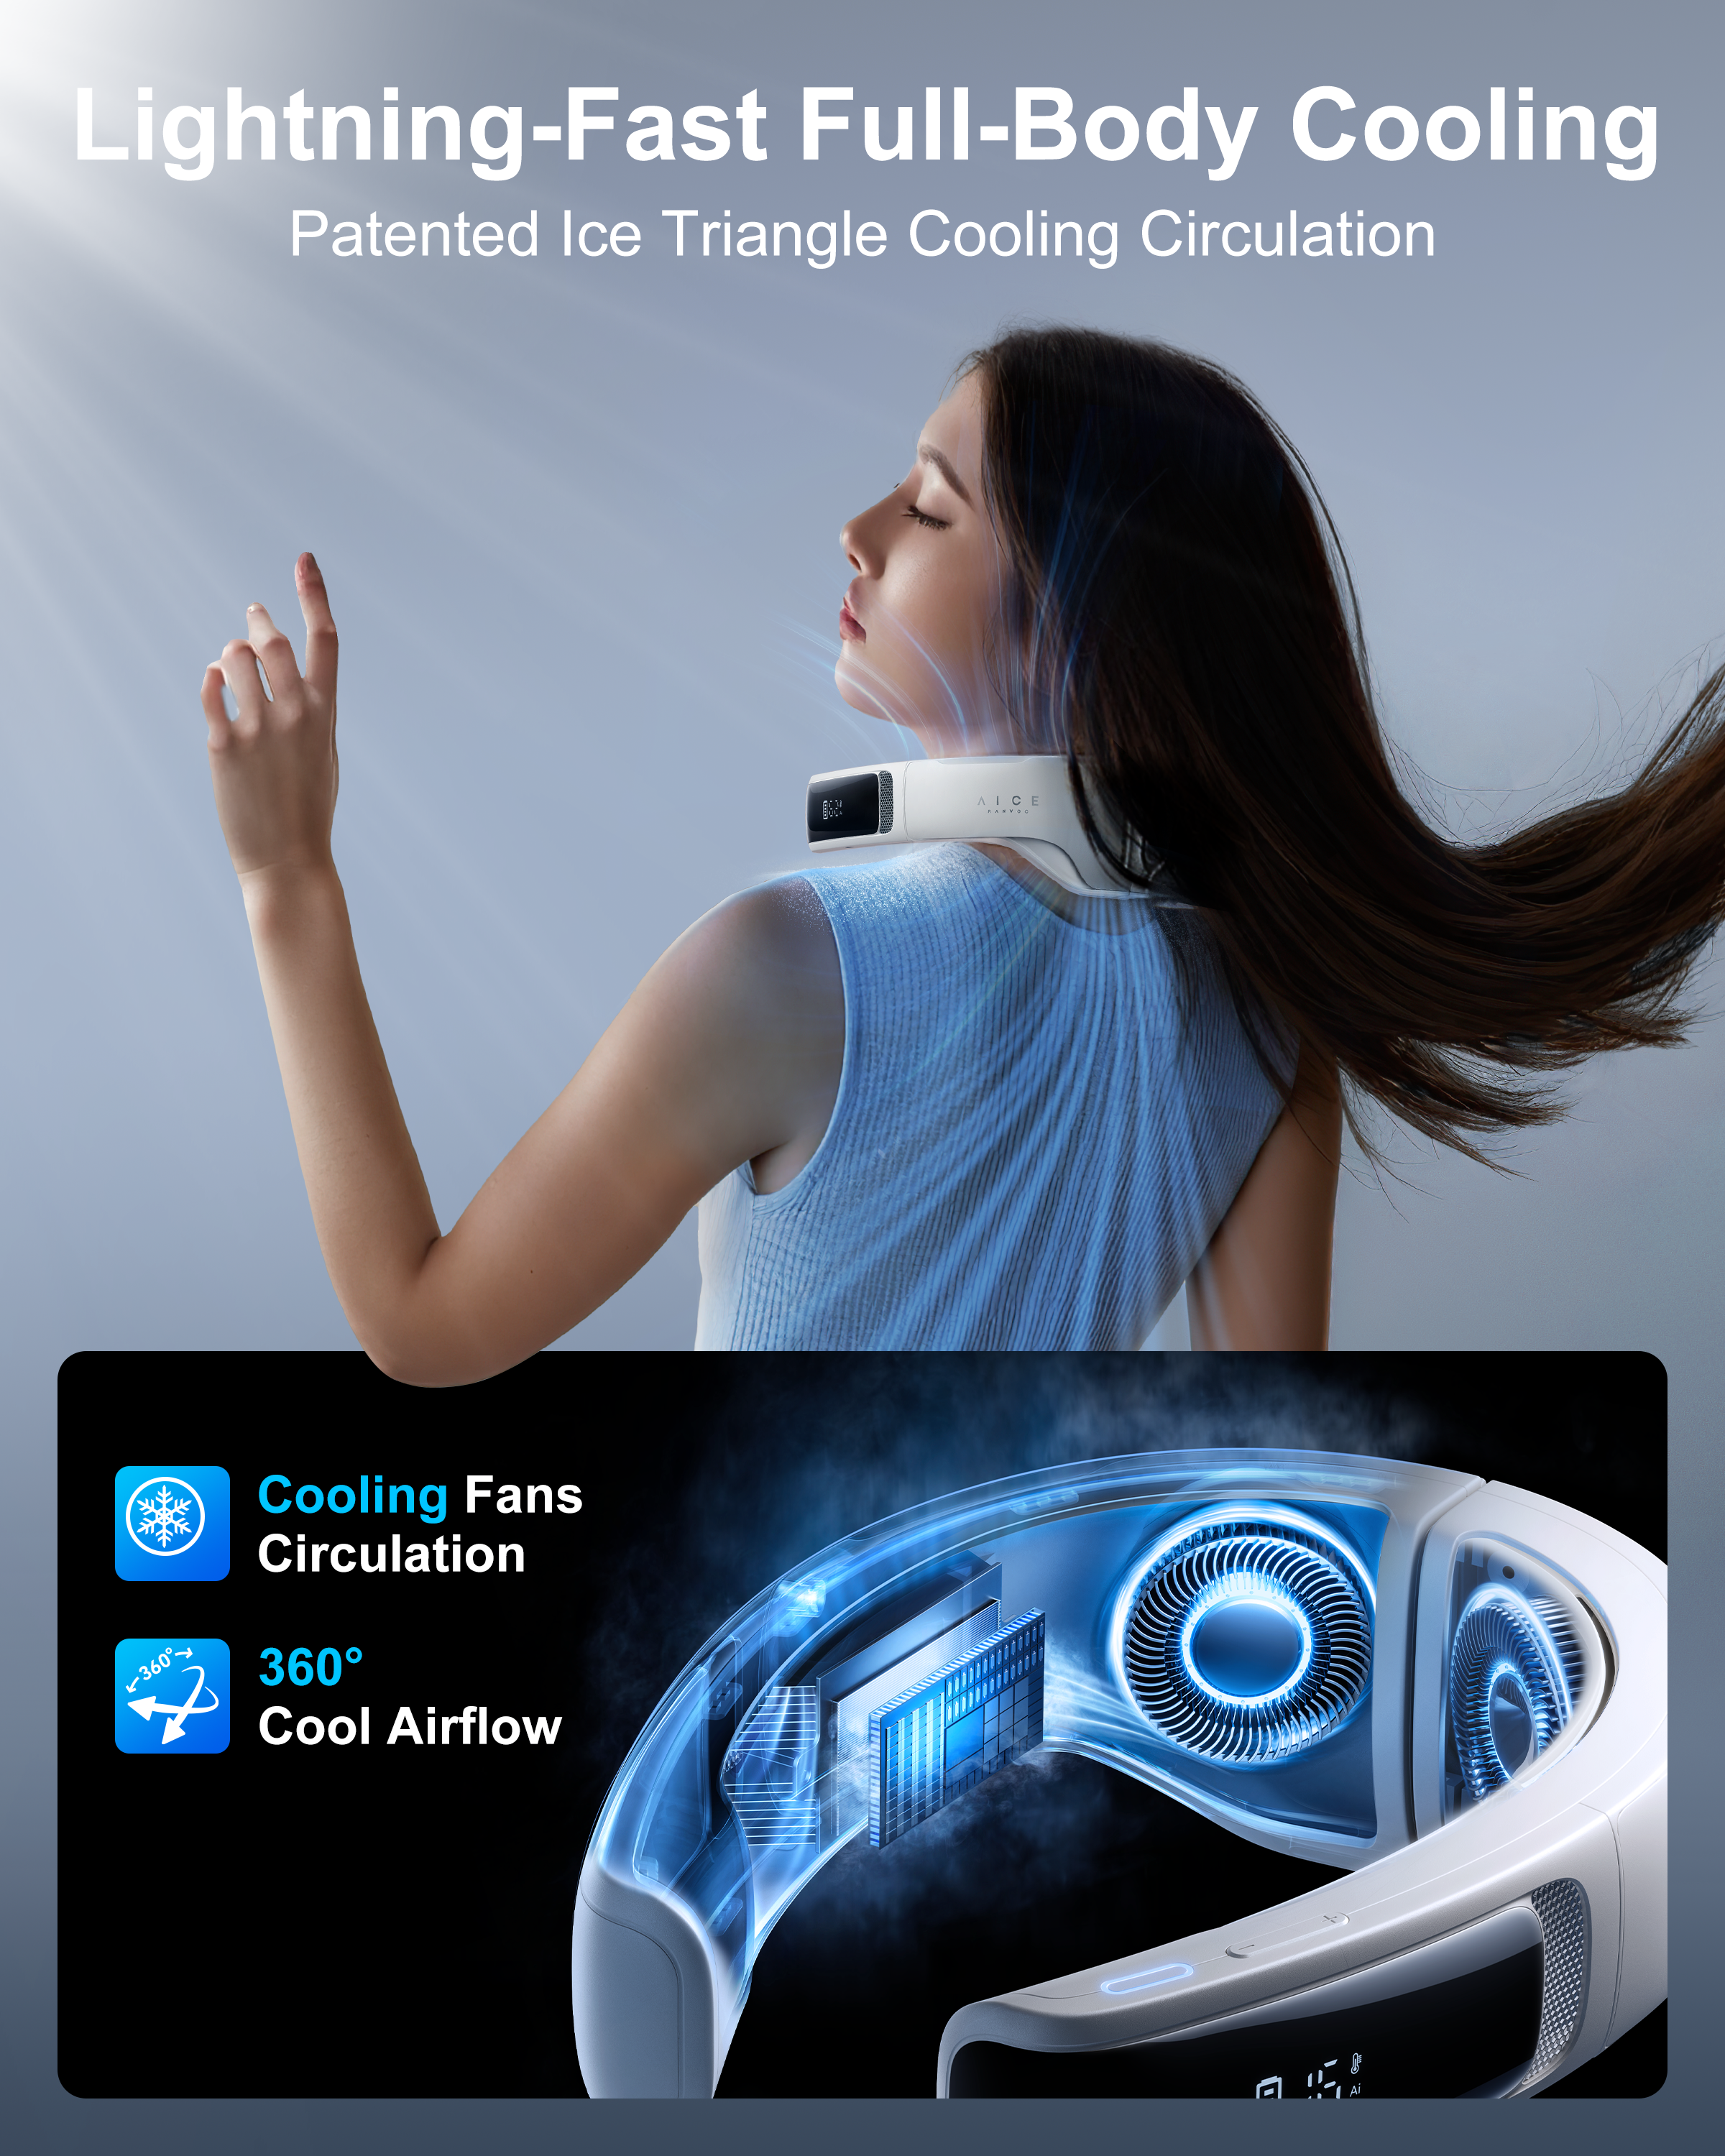 AICE LITE: Ultimate Cooling with the Largest Ice-Triangle